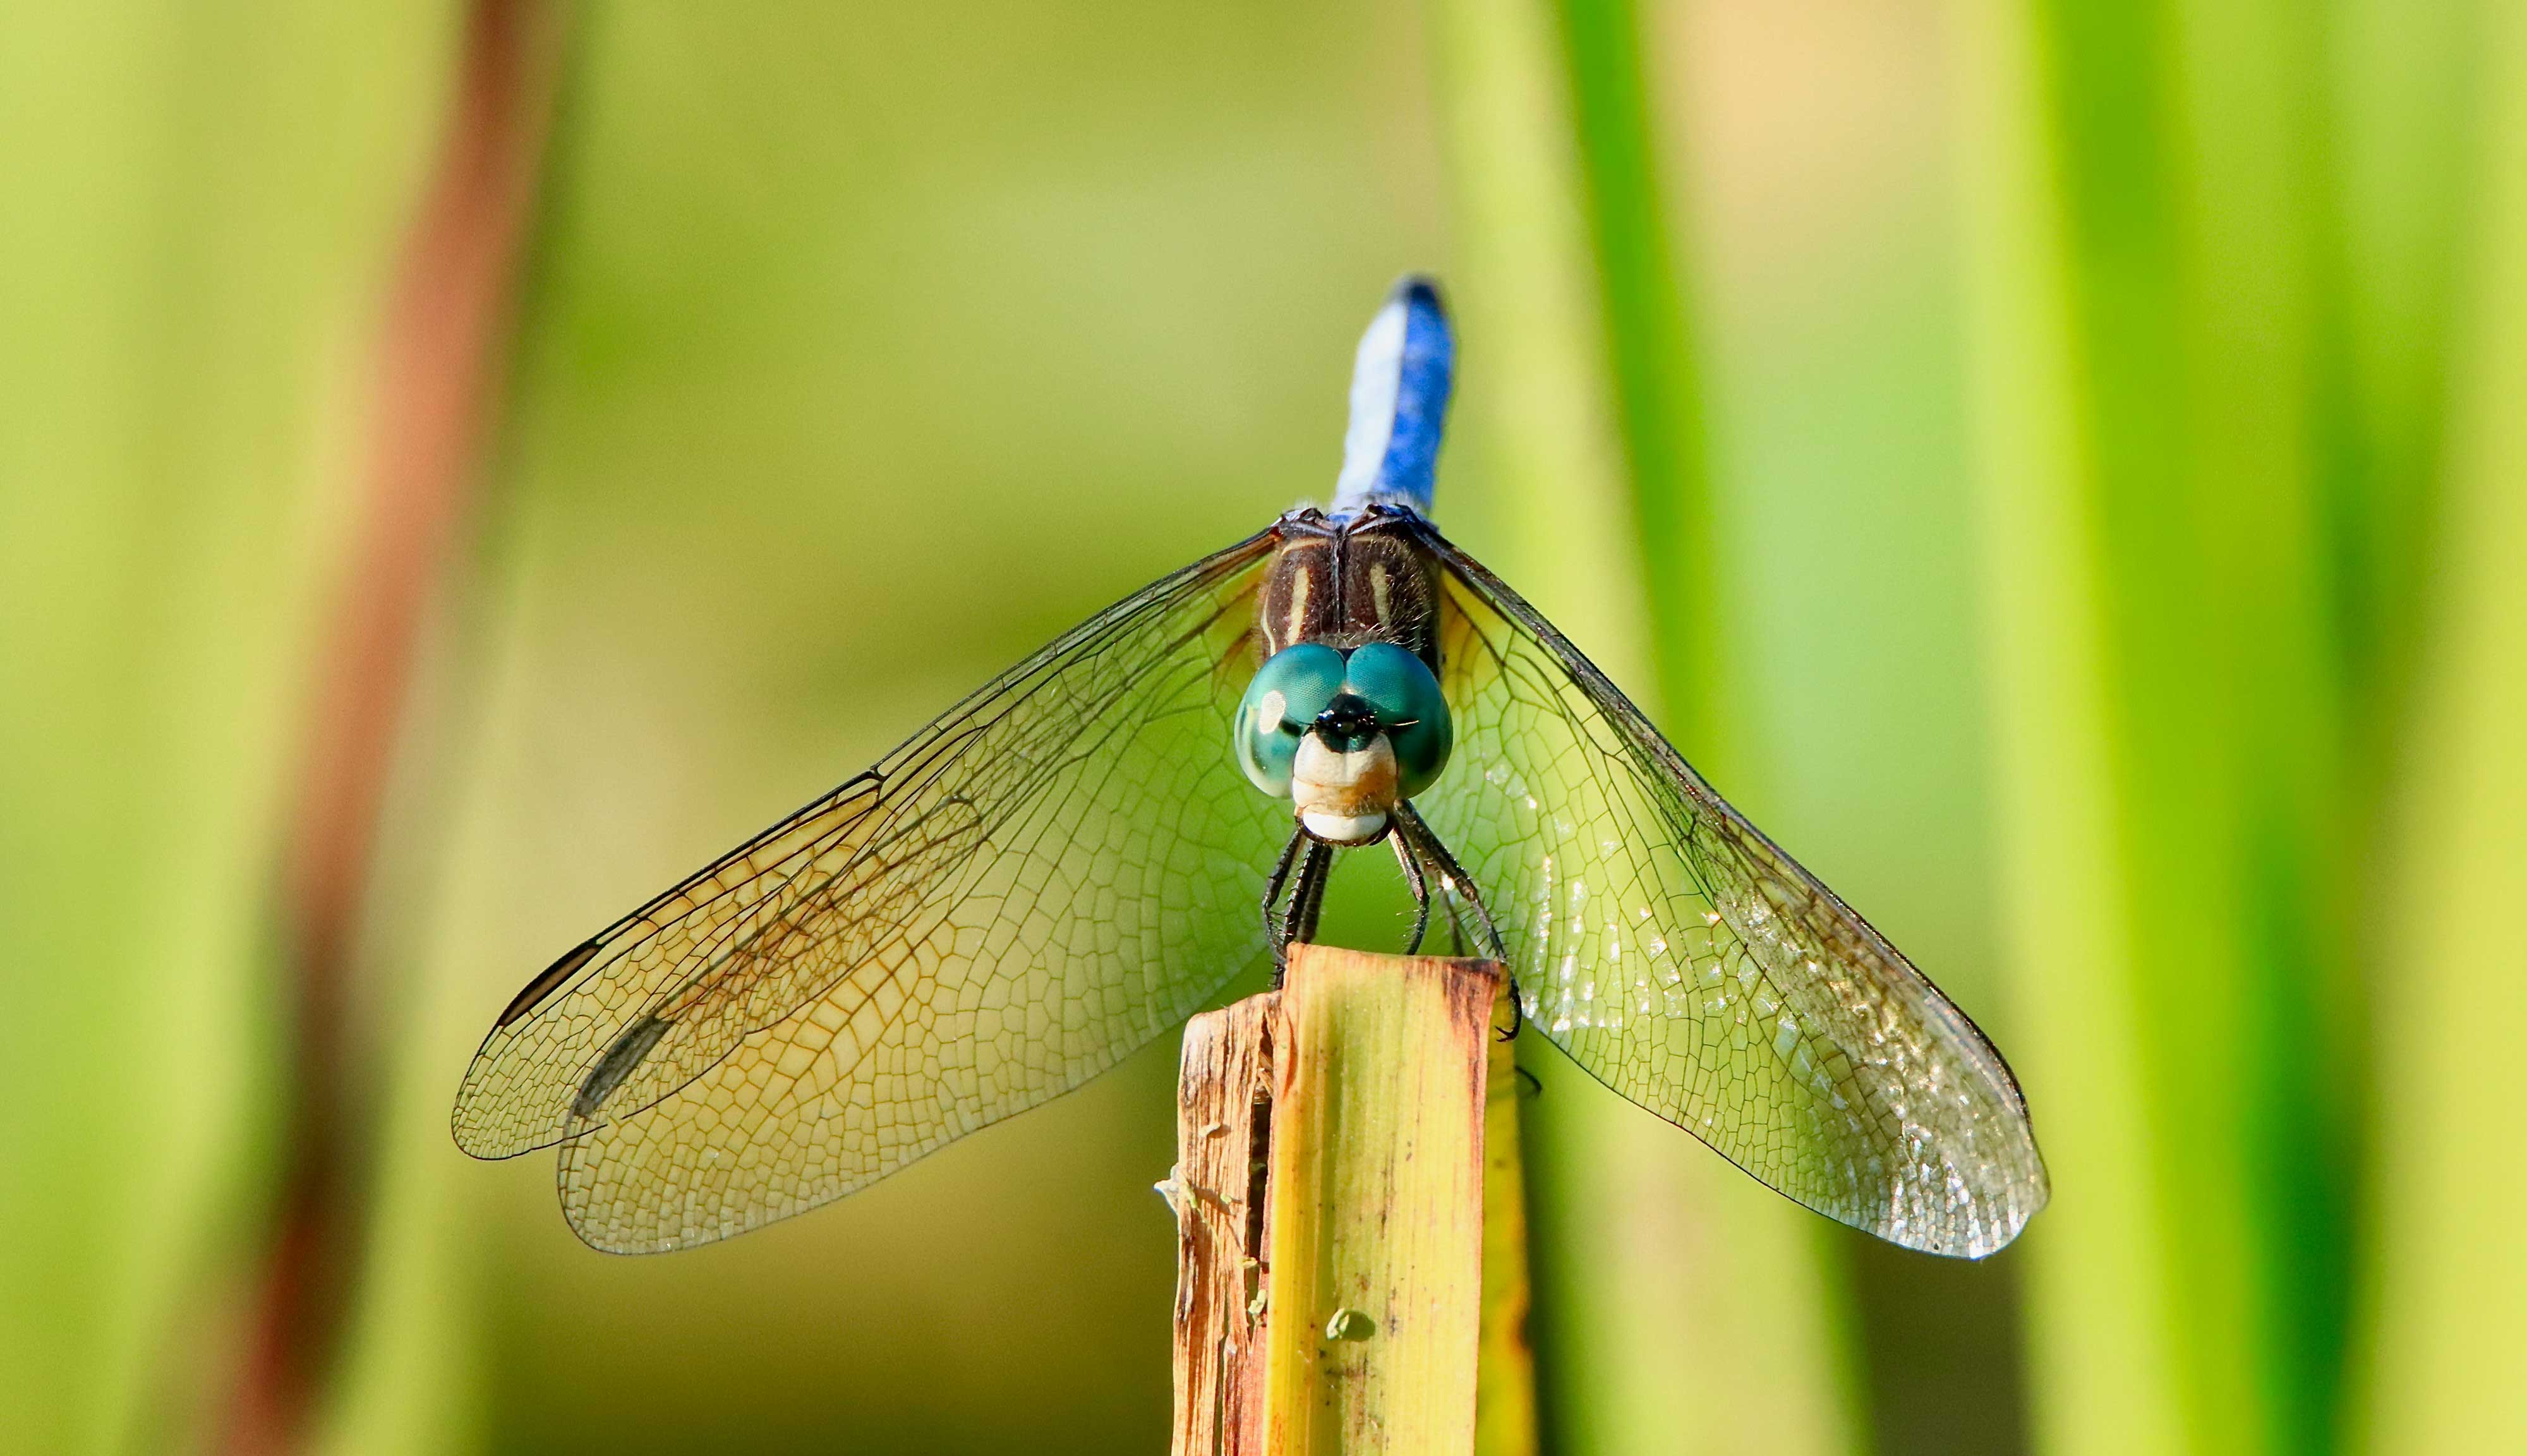 A close-up of a dragonfly on vegetation.